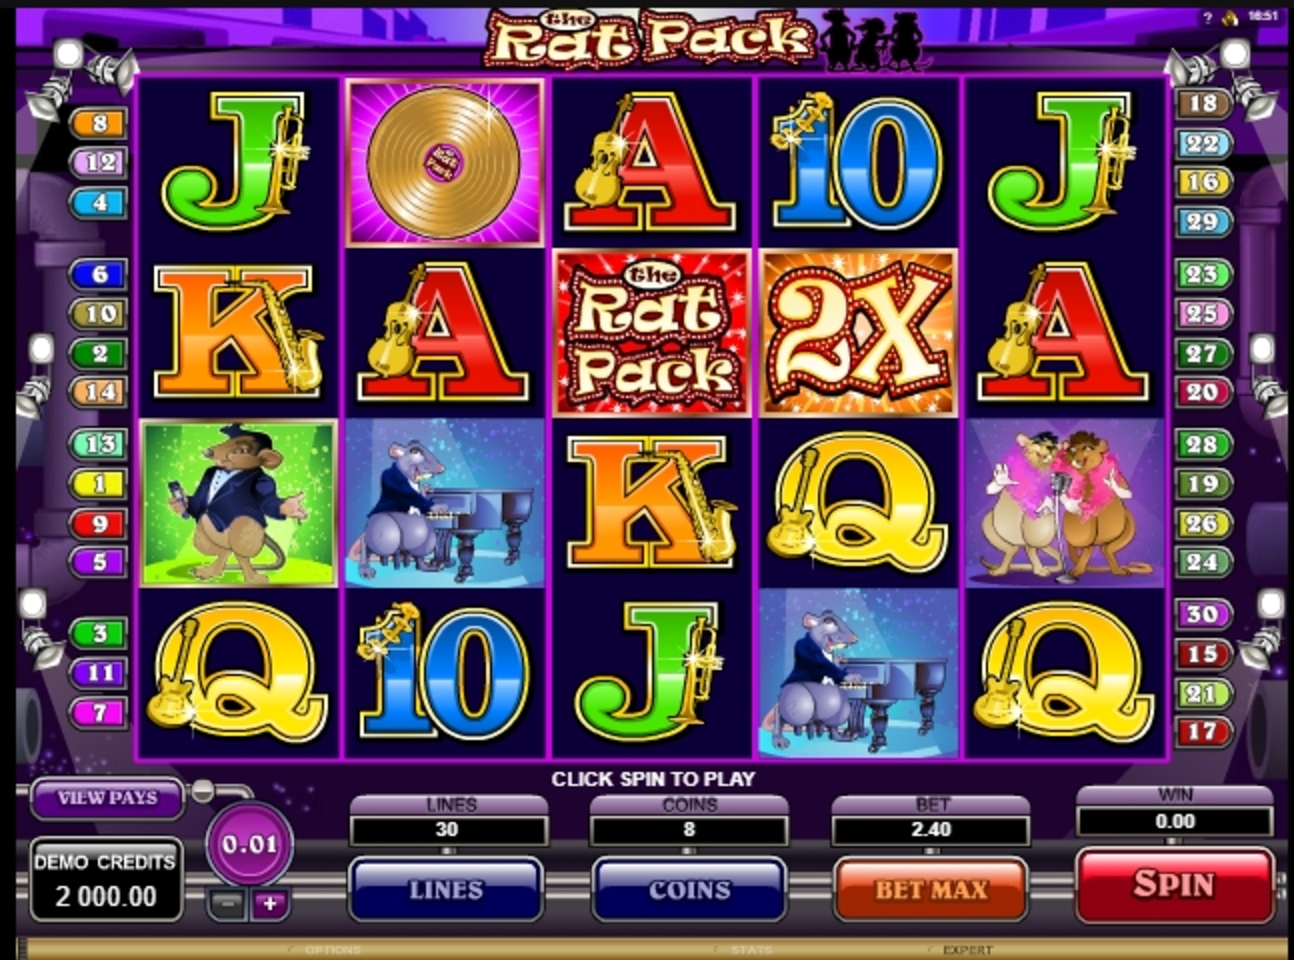 Reels in The Rat Pack Slot Game by Microgaming